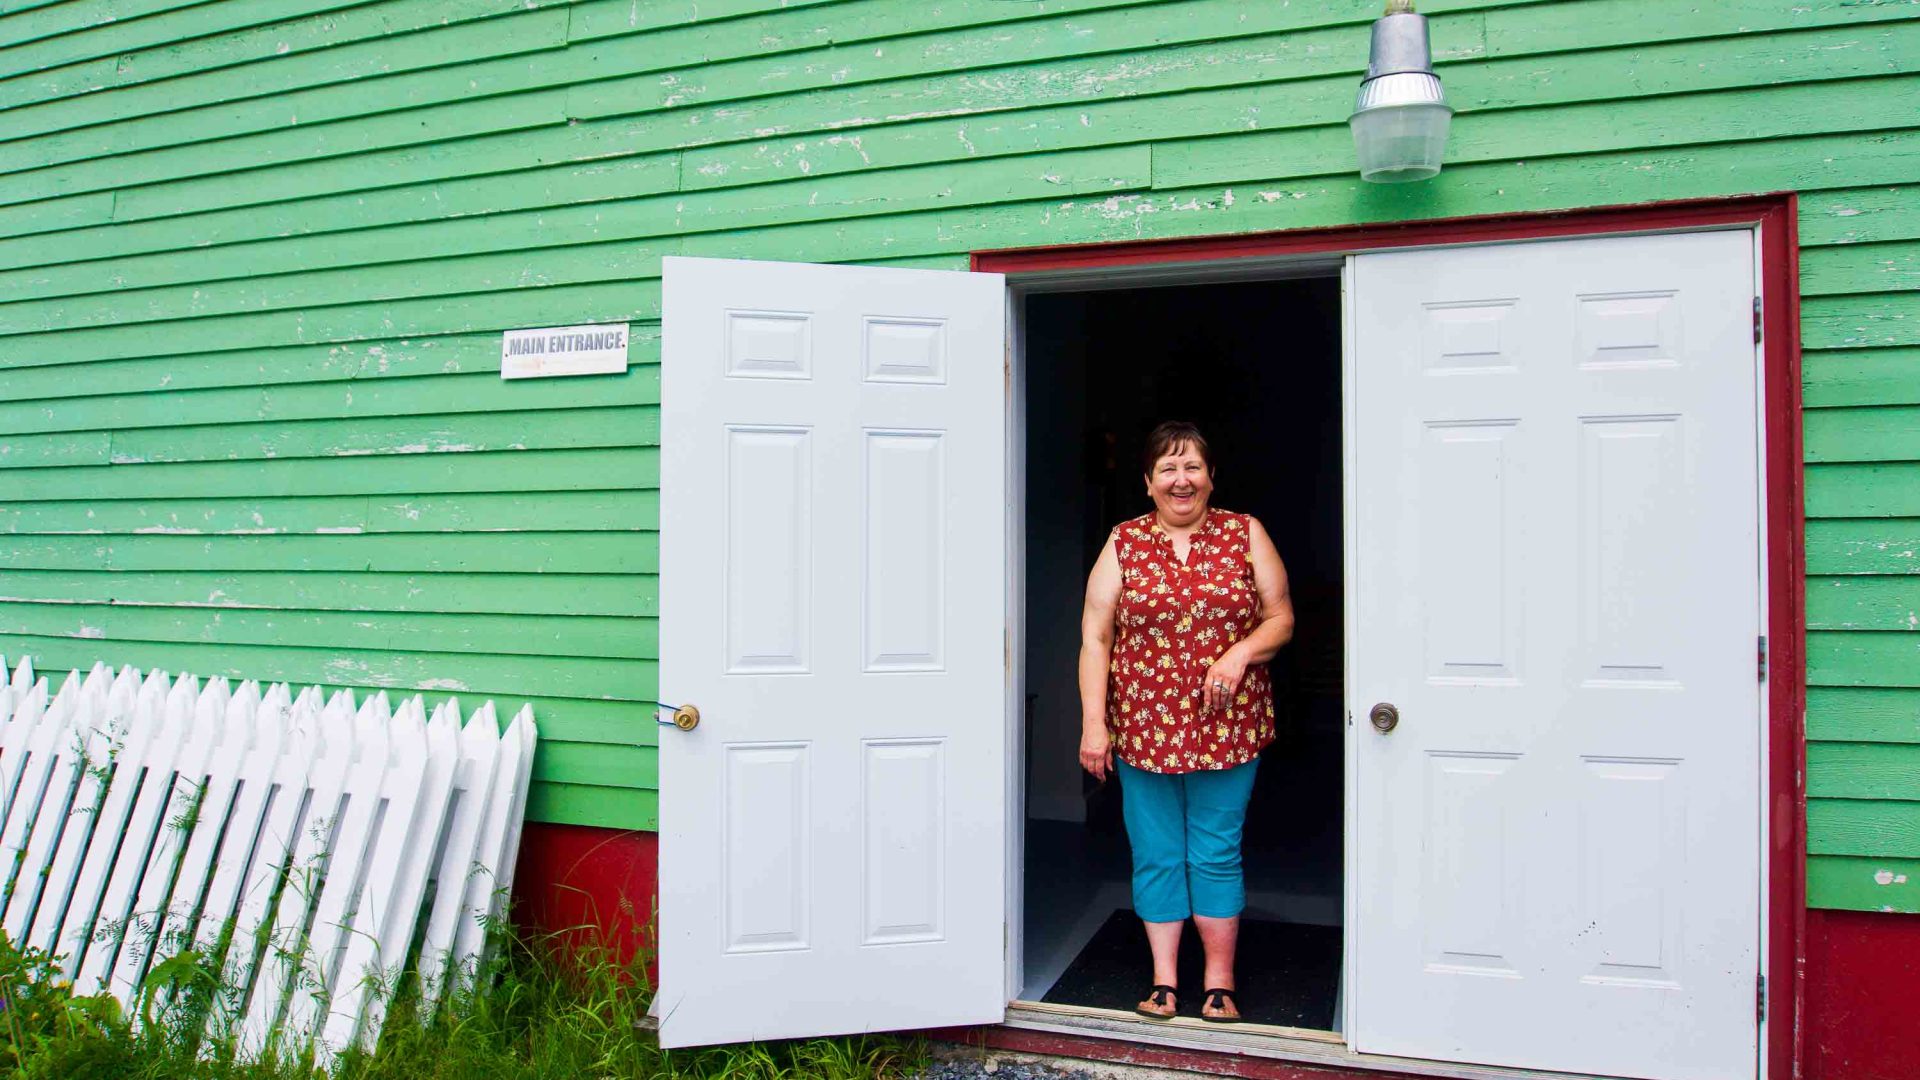 A woman smiles in the doorway of a green building.